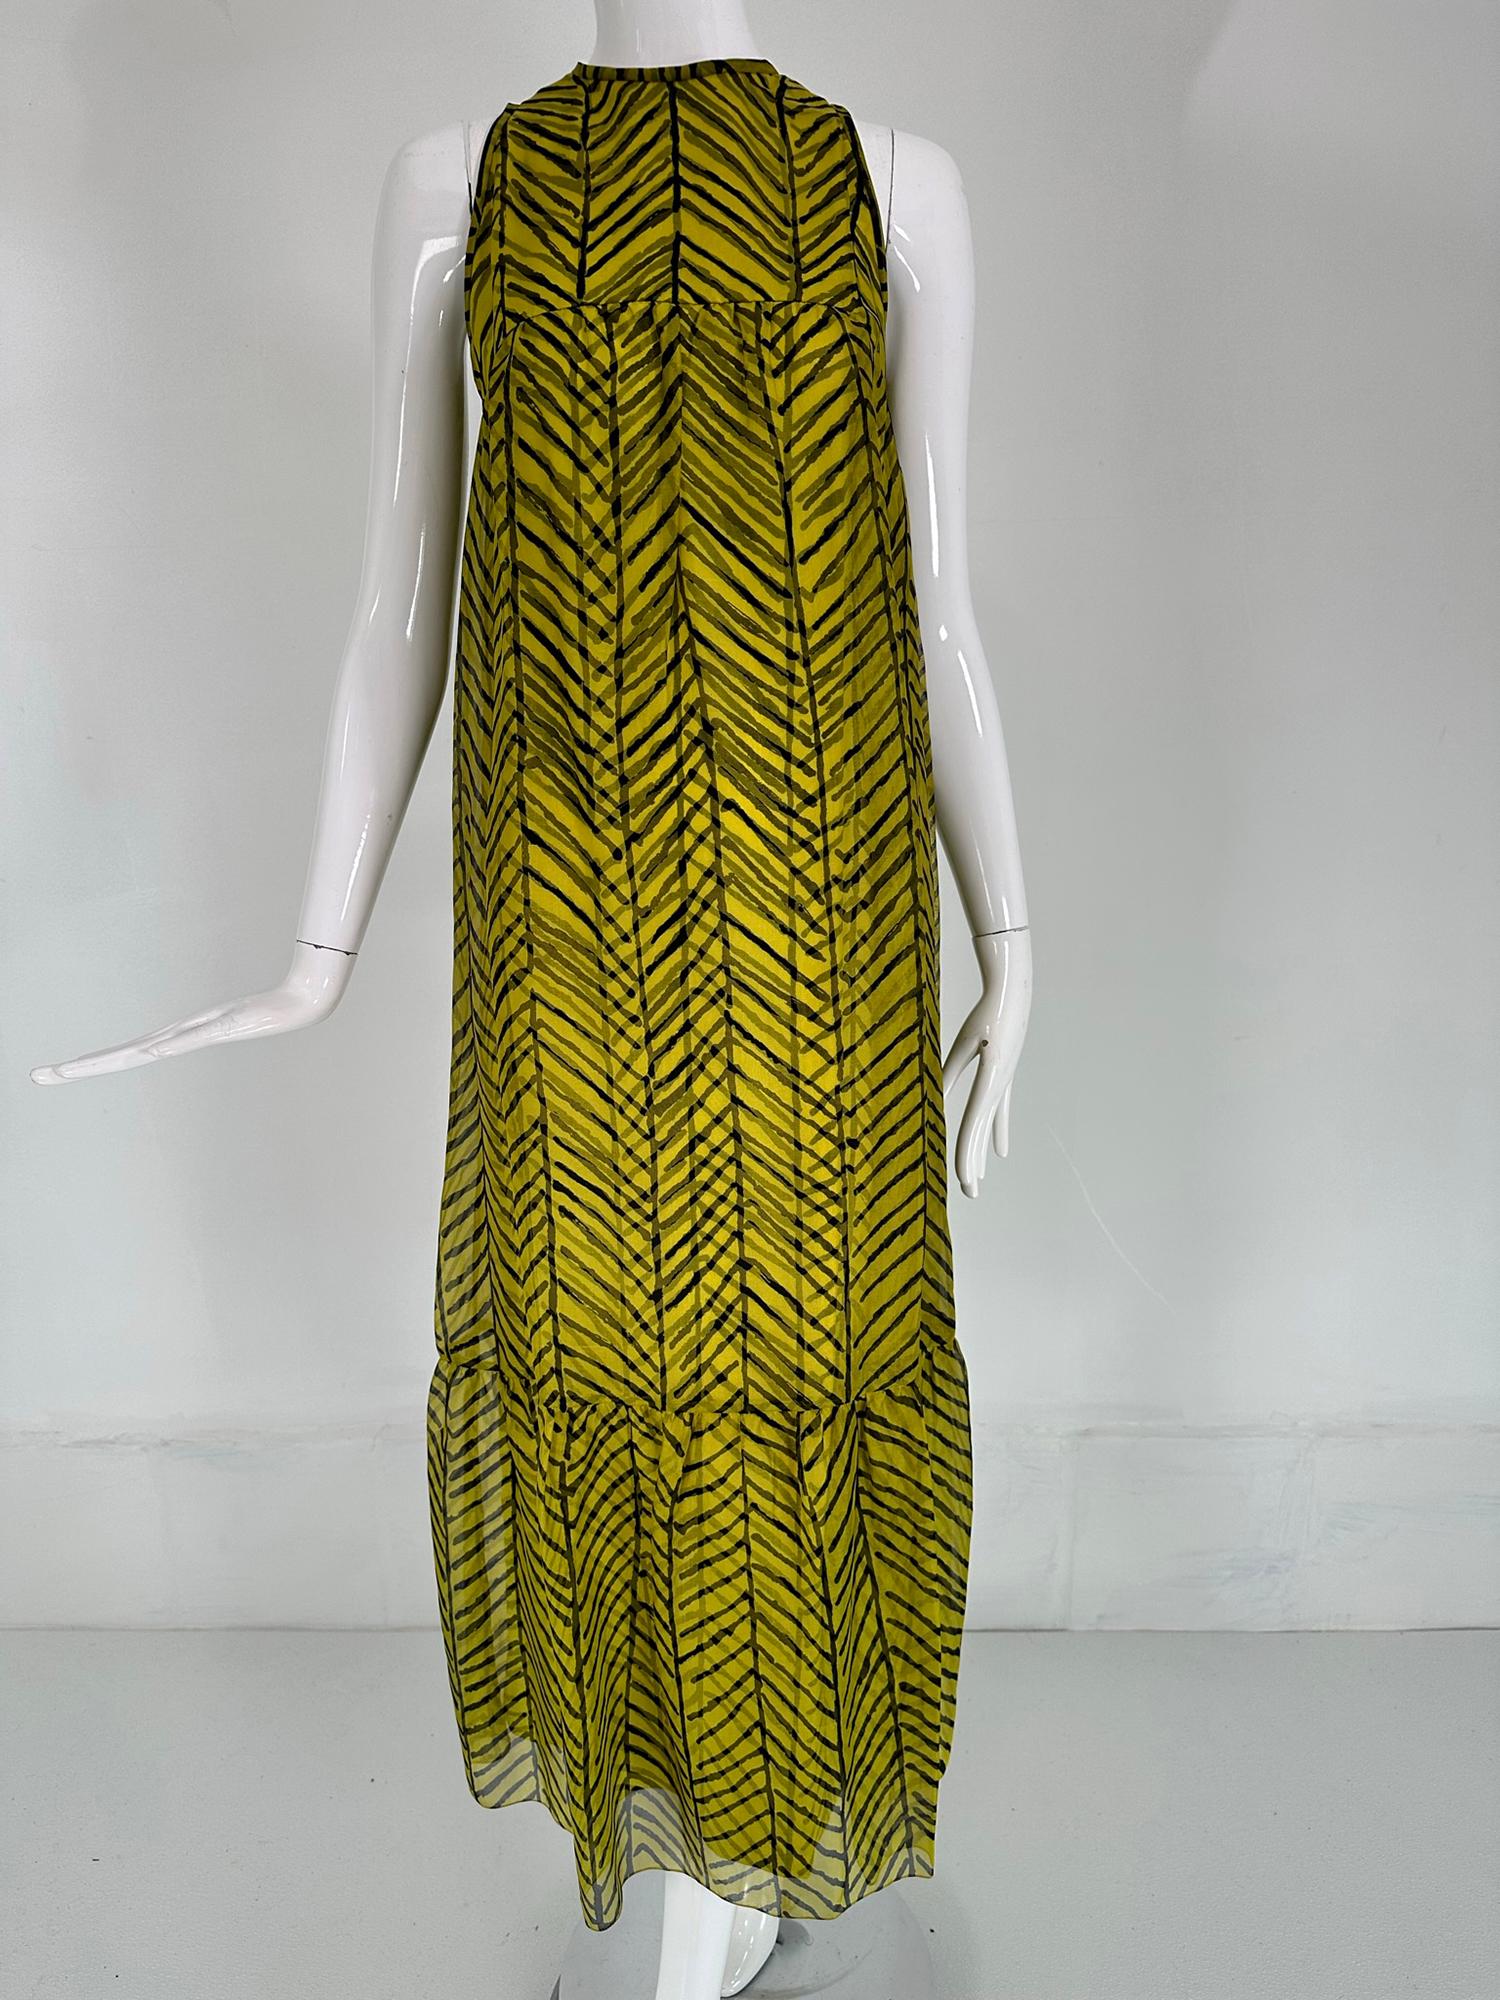 Tiffeau & Busch LTD. New York, 1966 chartreuse yellow & black hand print silk organza & silk twill maxi dress. Jacques Tiffeau was known for his elegant designs crafted from start to finish by a designer who actually knew the process & could preform